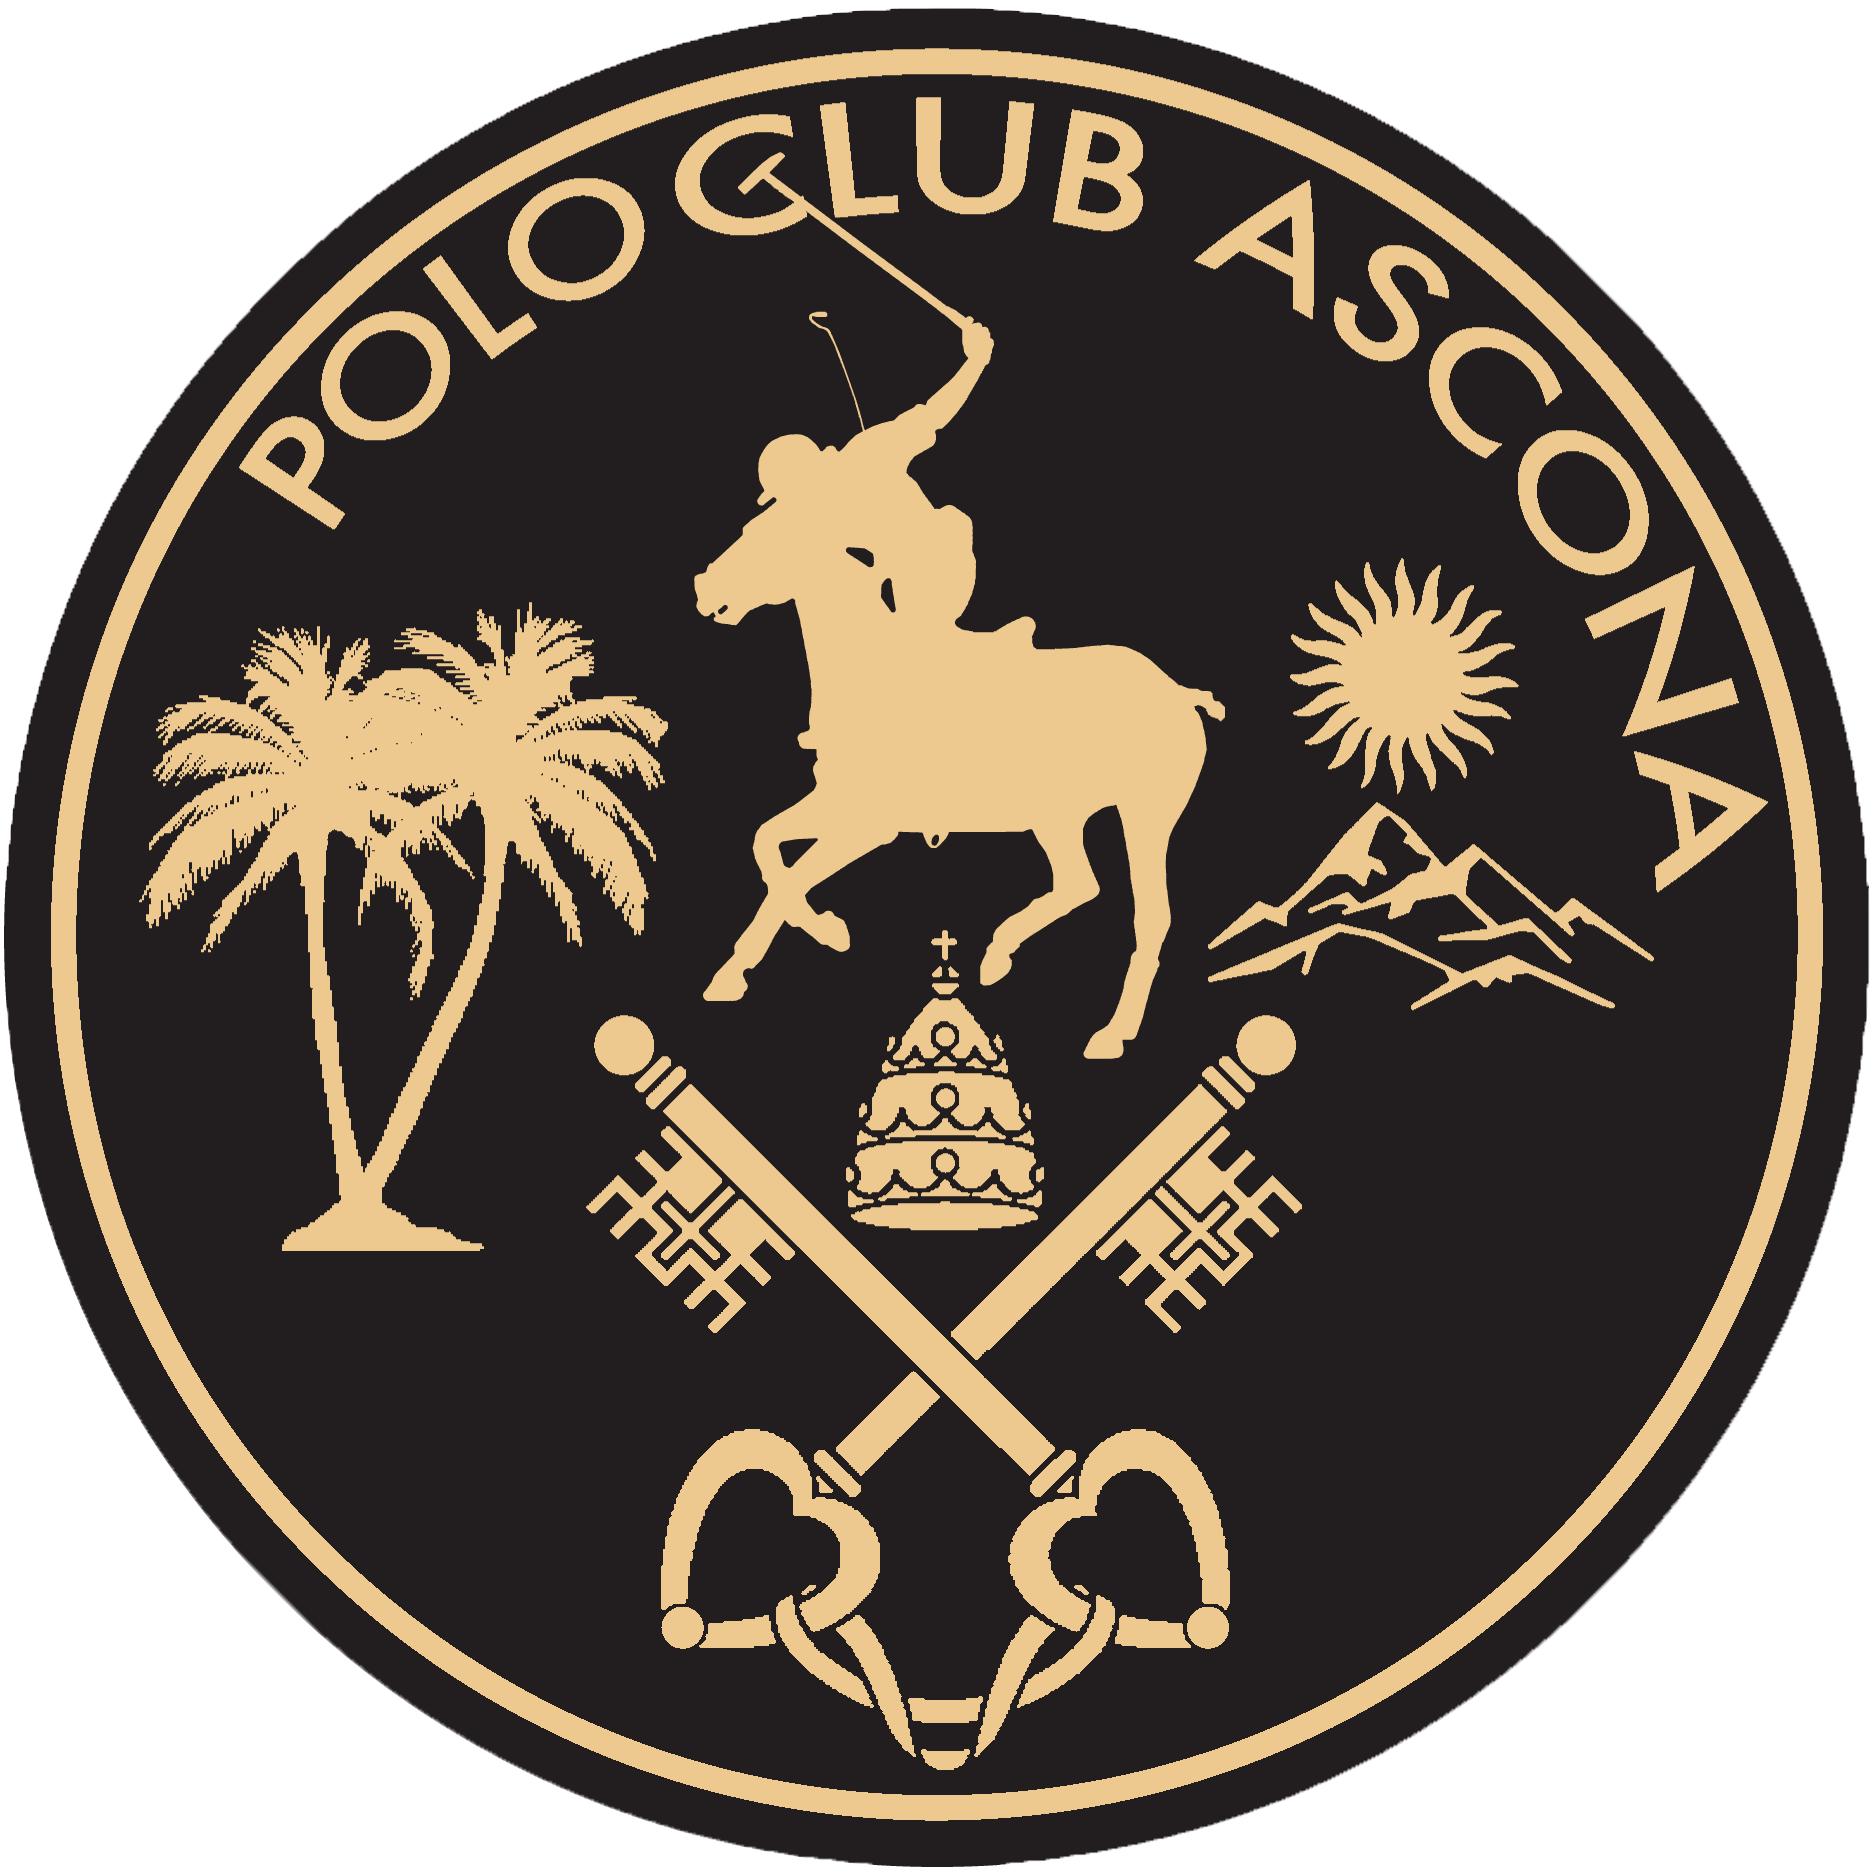 Images tagged "polo-club-ascona"